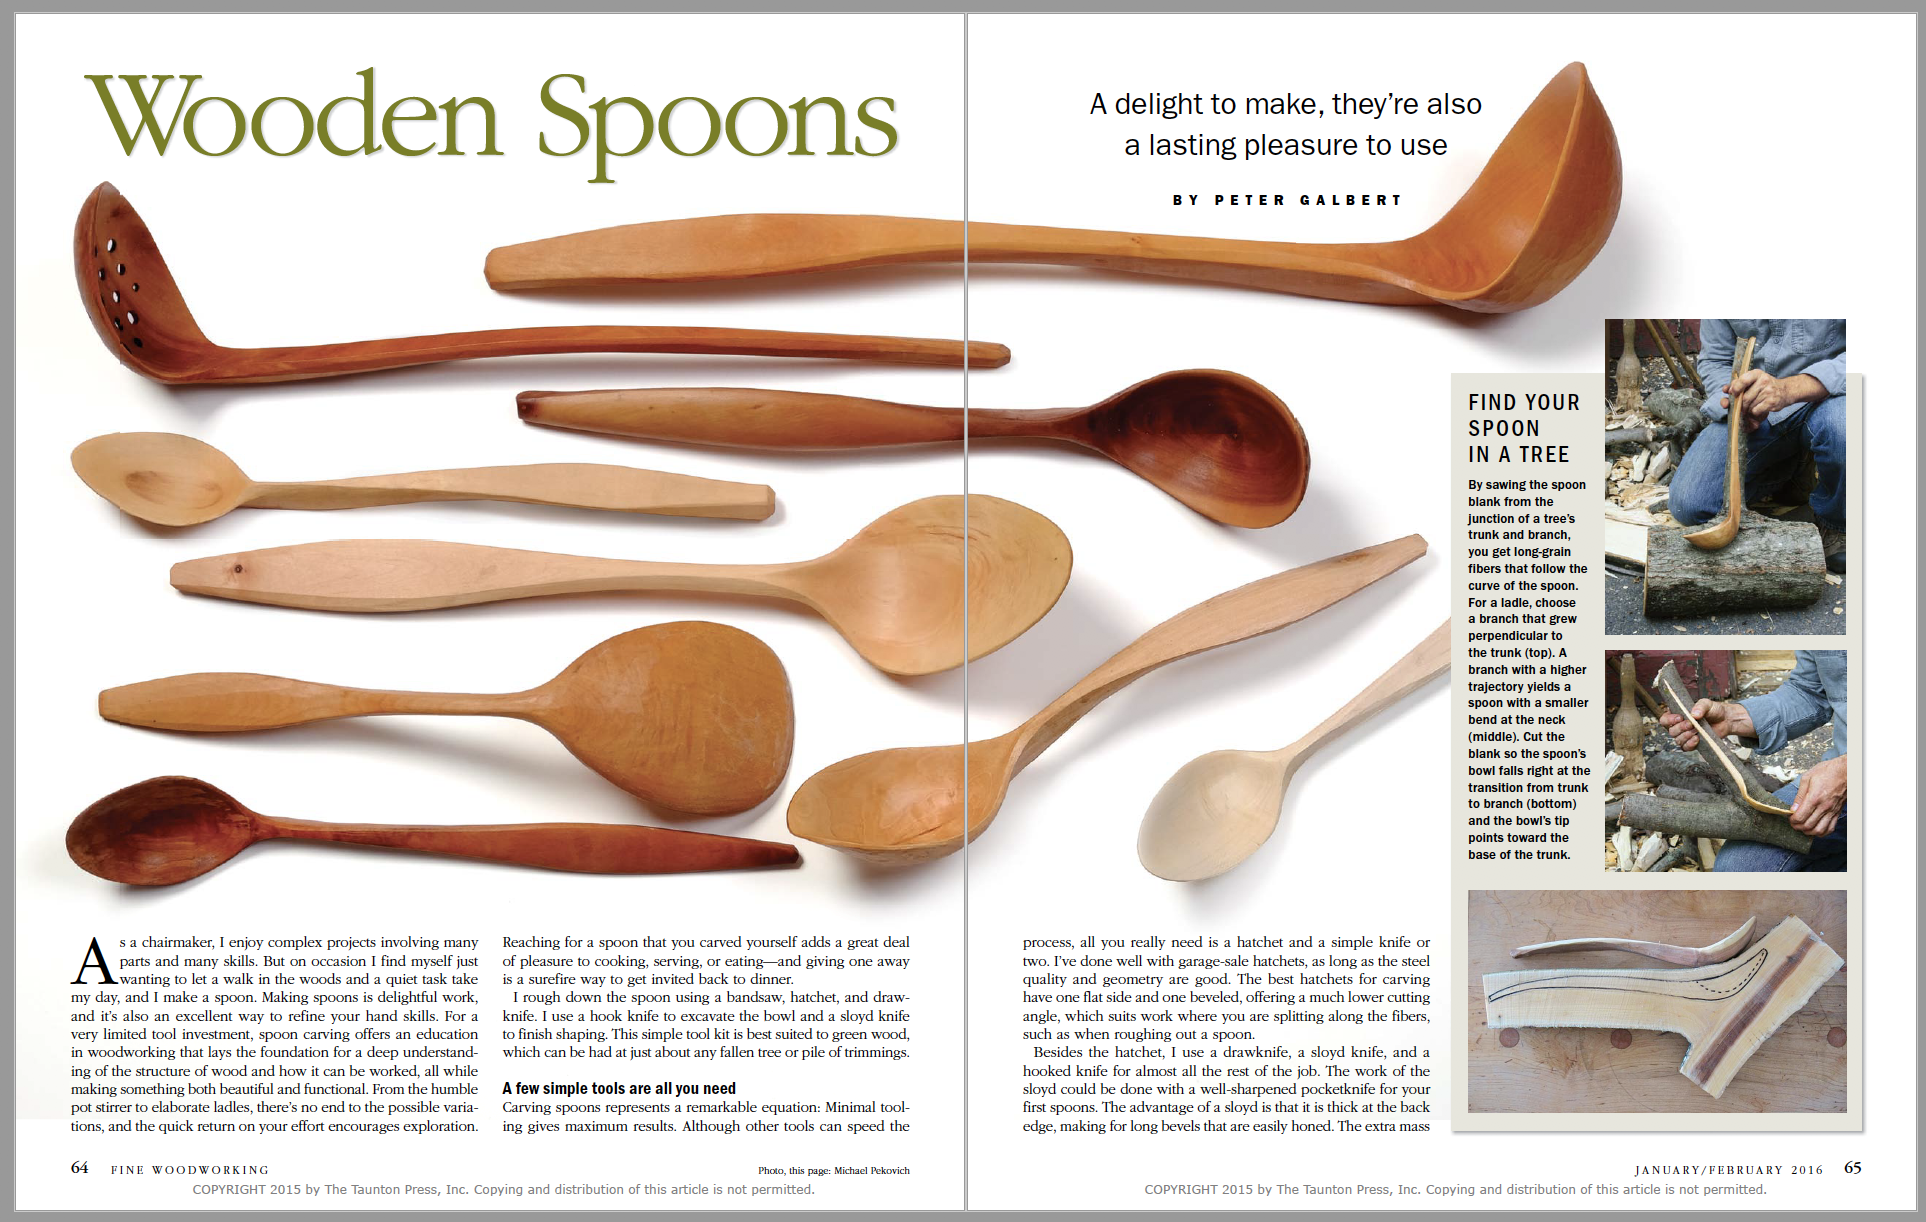 How to make a wooden spoon Spread Image